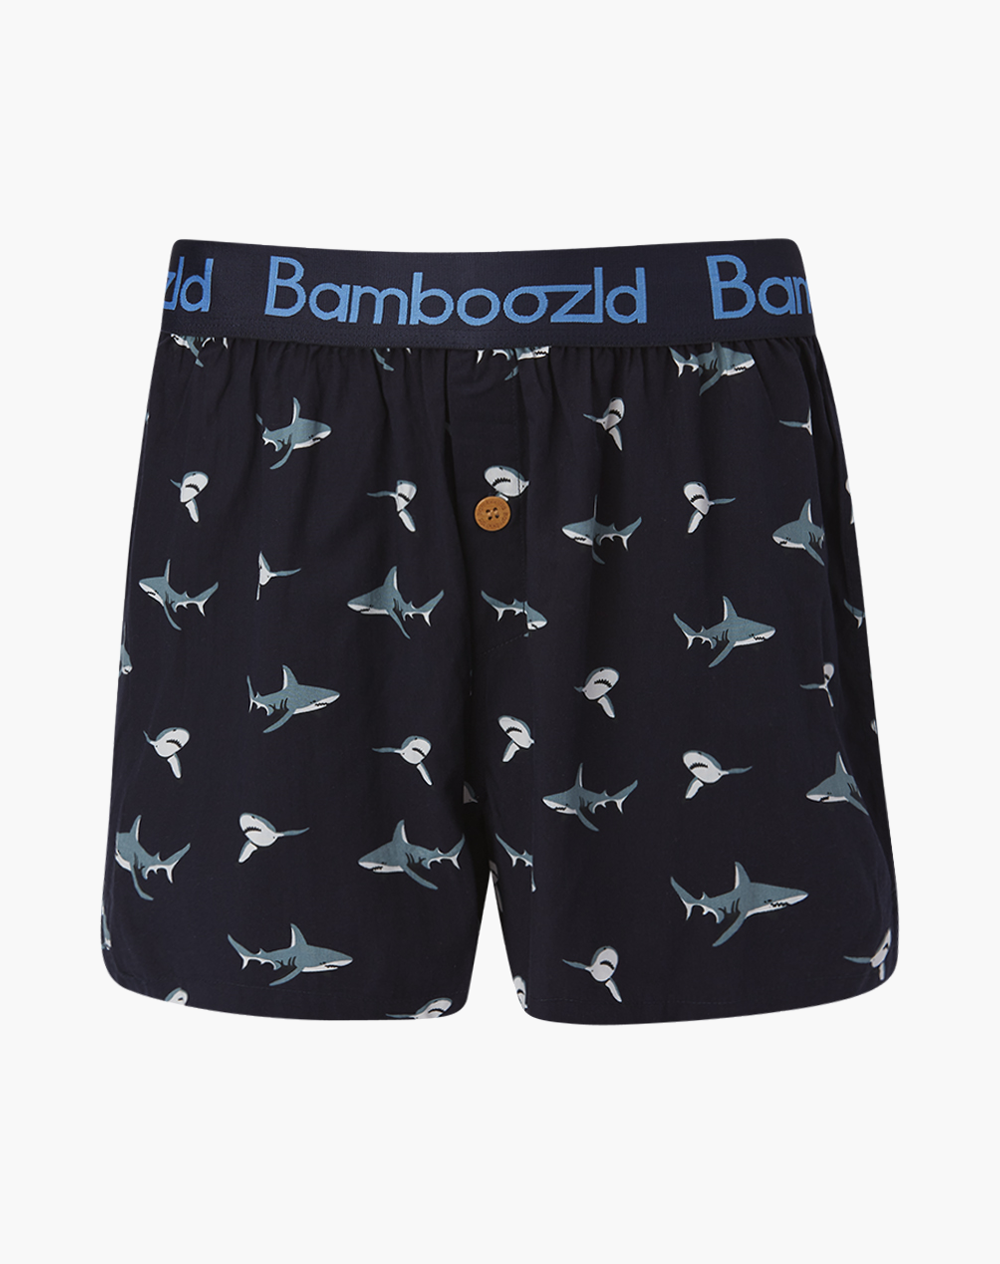 MENS JAWS BAMBOO BOXER SHORT - MEDIUM SIZE ONLY